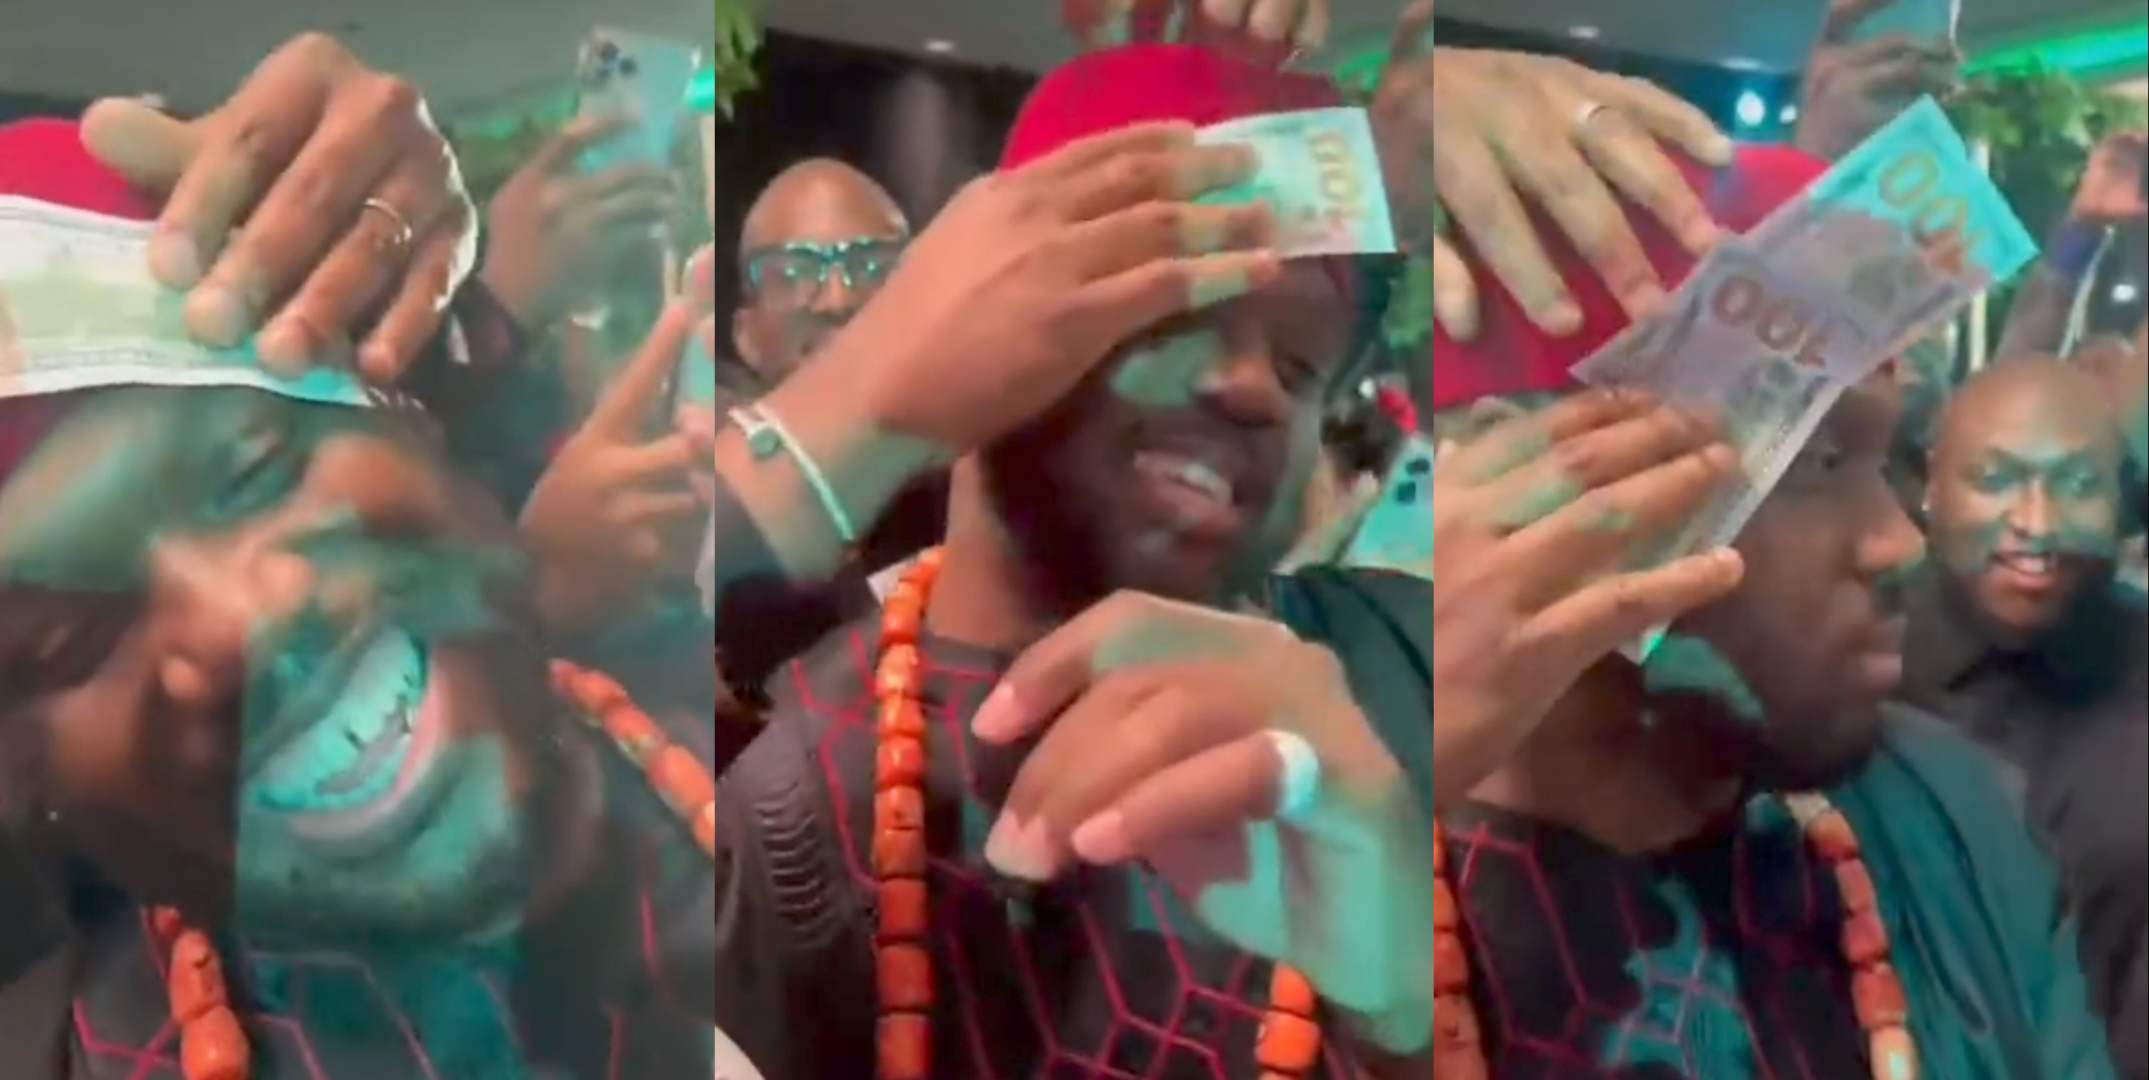 Friends make it rain dollars on man during party (Video)